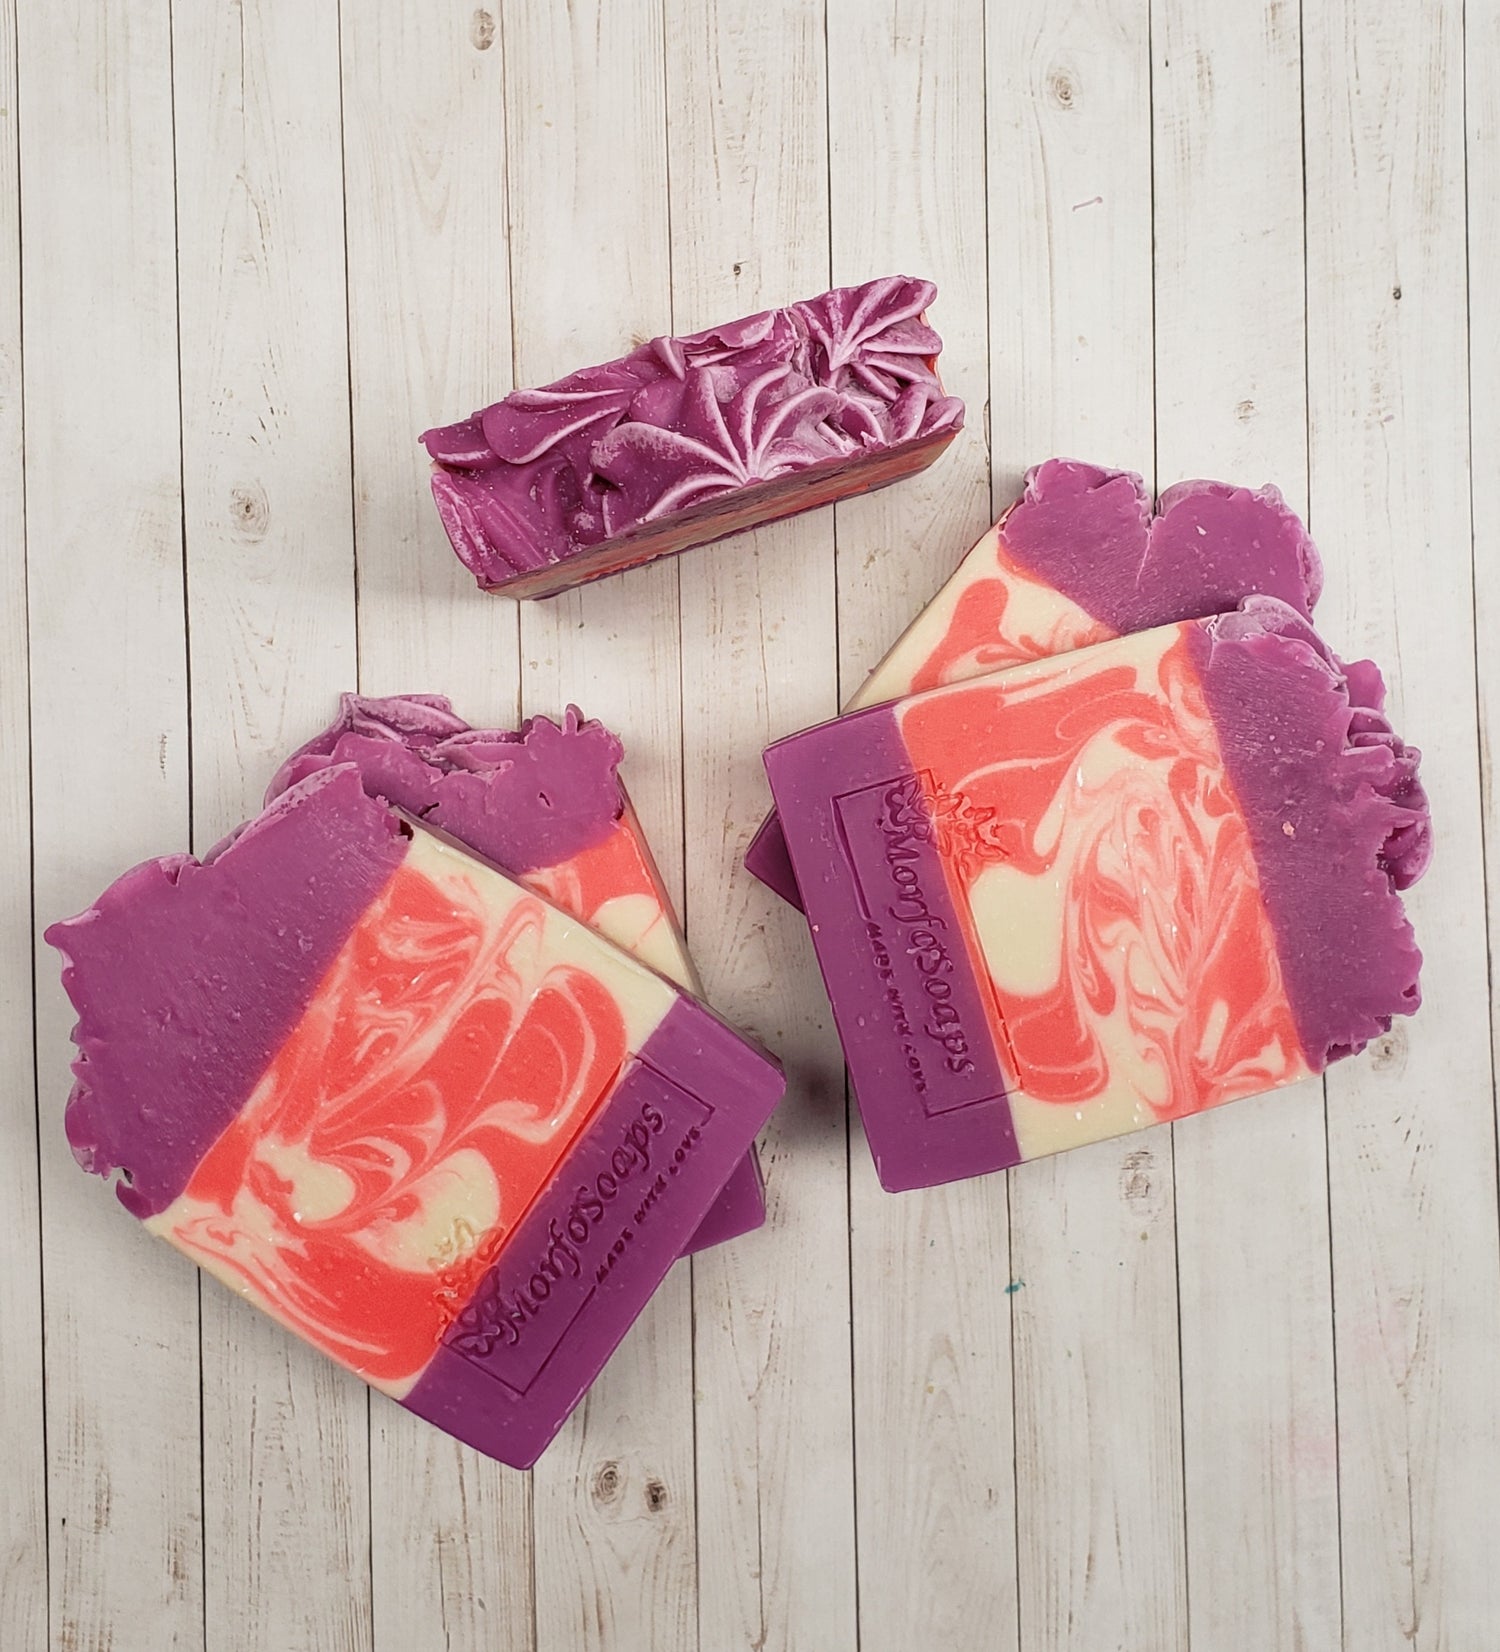 All-Natural Soaps